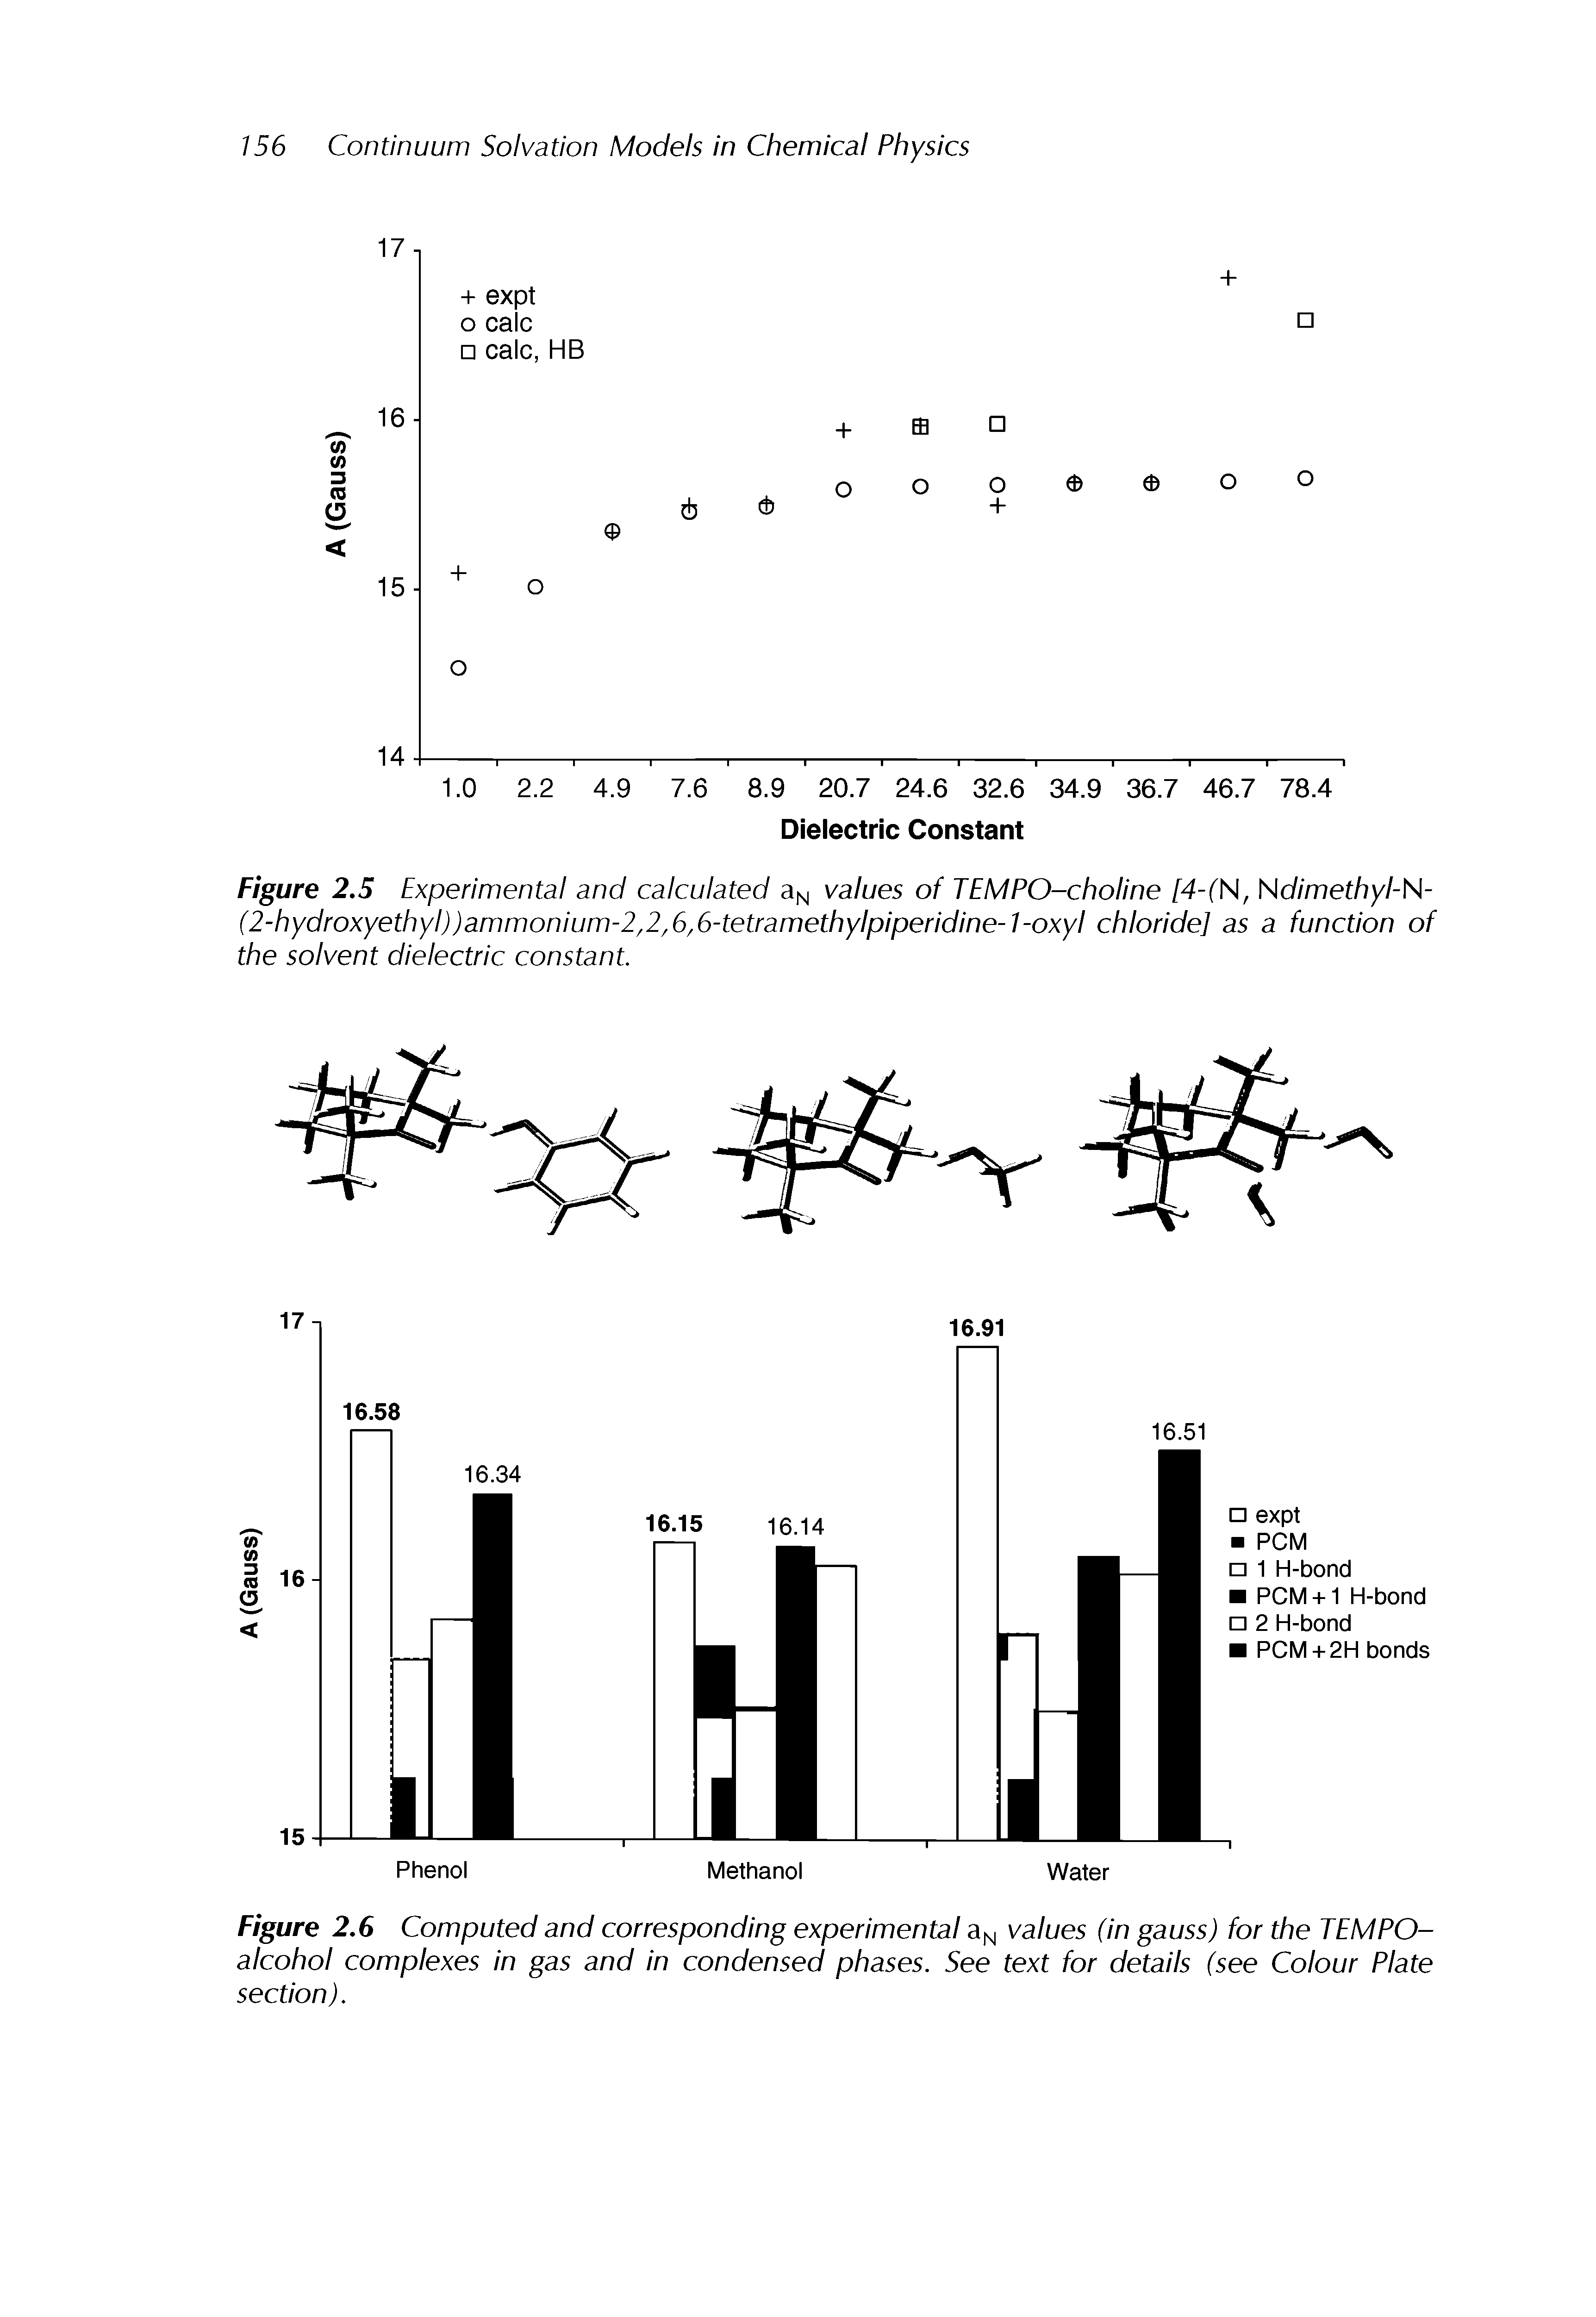 Figure 2.5 Experimental and calculated aN values of TEMPO-choline [4-(N, Ndimethyl-N-(2-hydroxyethyl))ammonium-2/2/6/6-tetramethylpiperidine-l-oxyl chloride] as a function of the solvent dielectric constant.